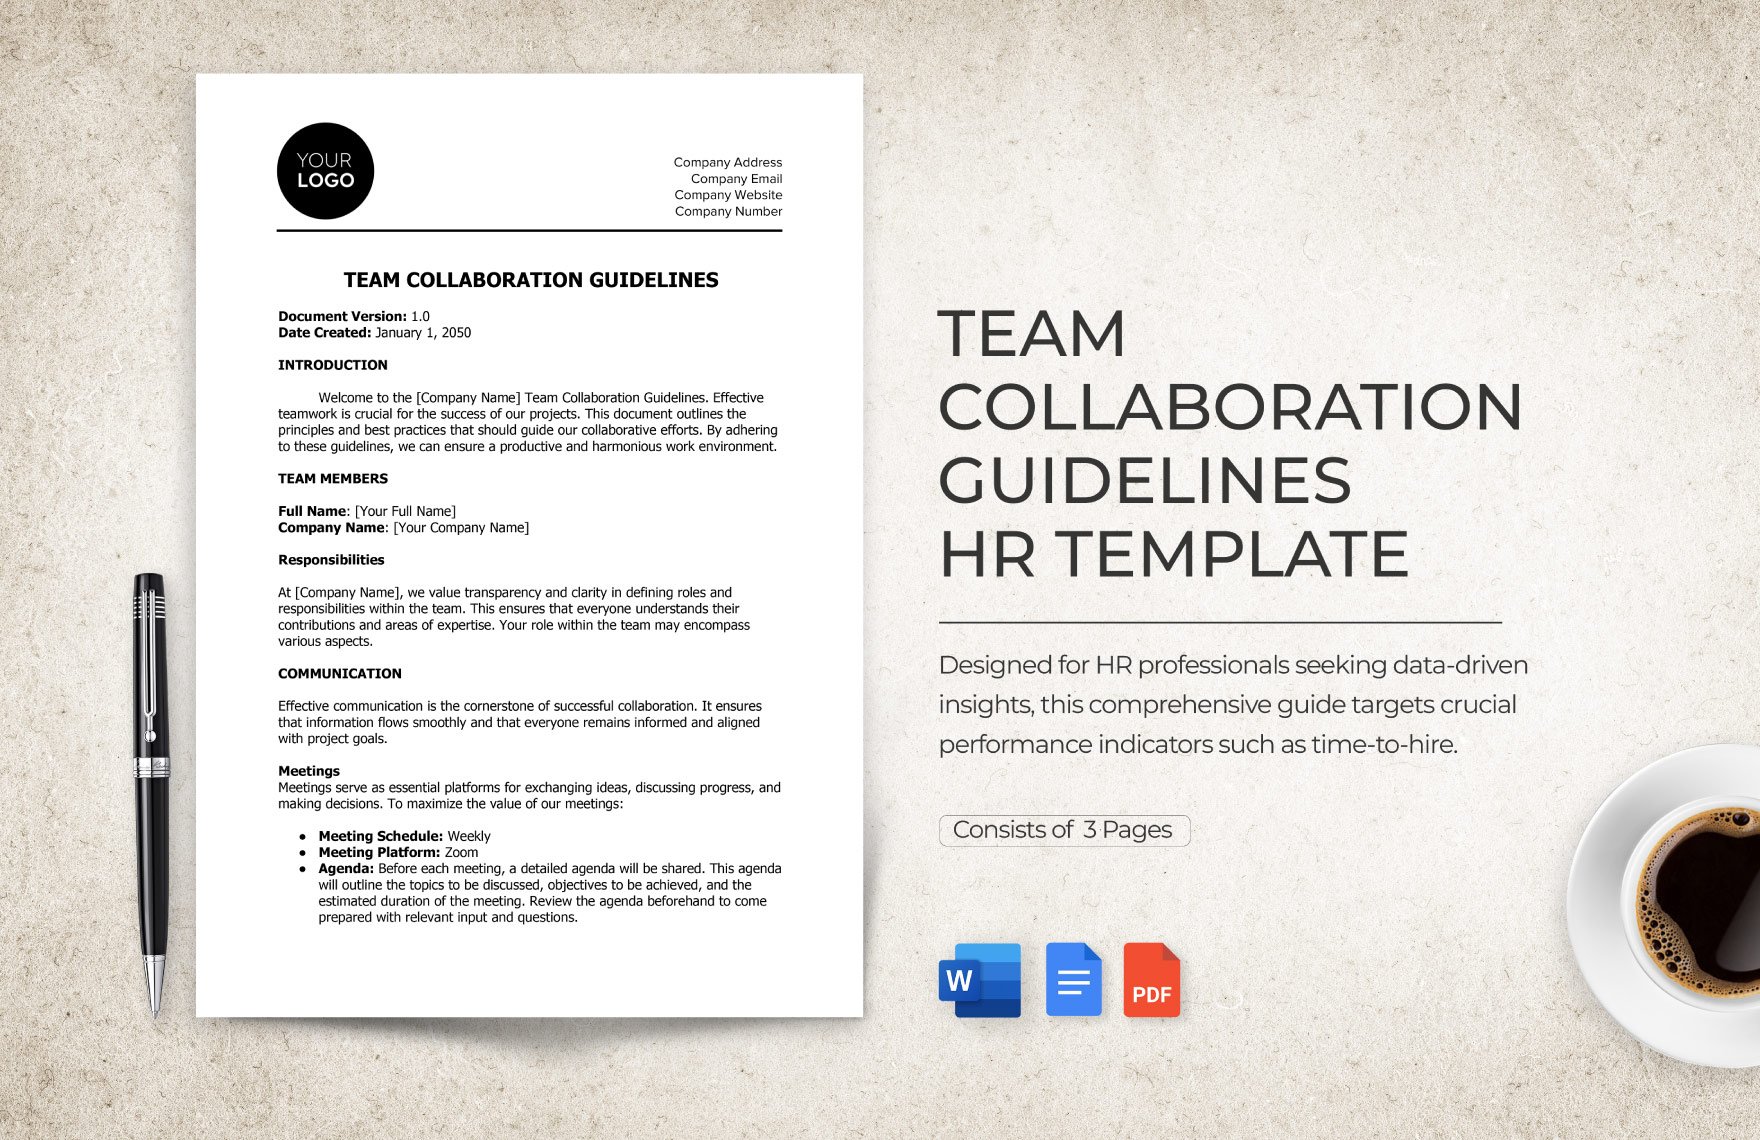 Team Collaboration Guidelines HR Template